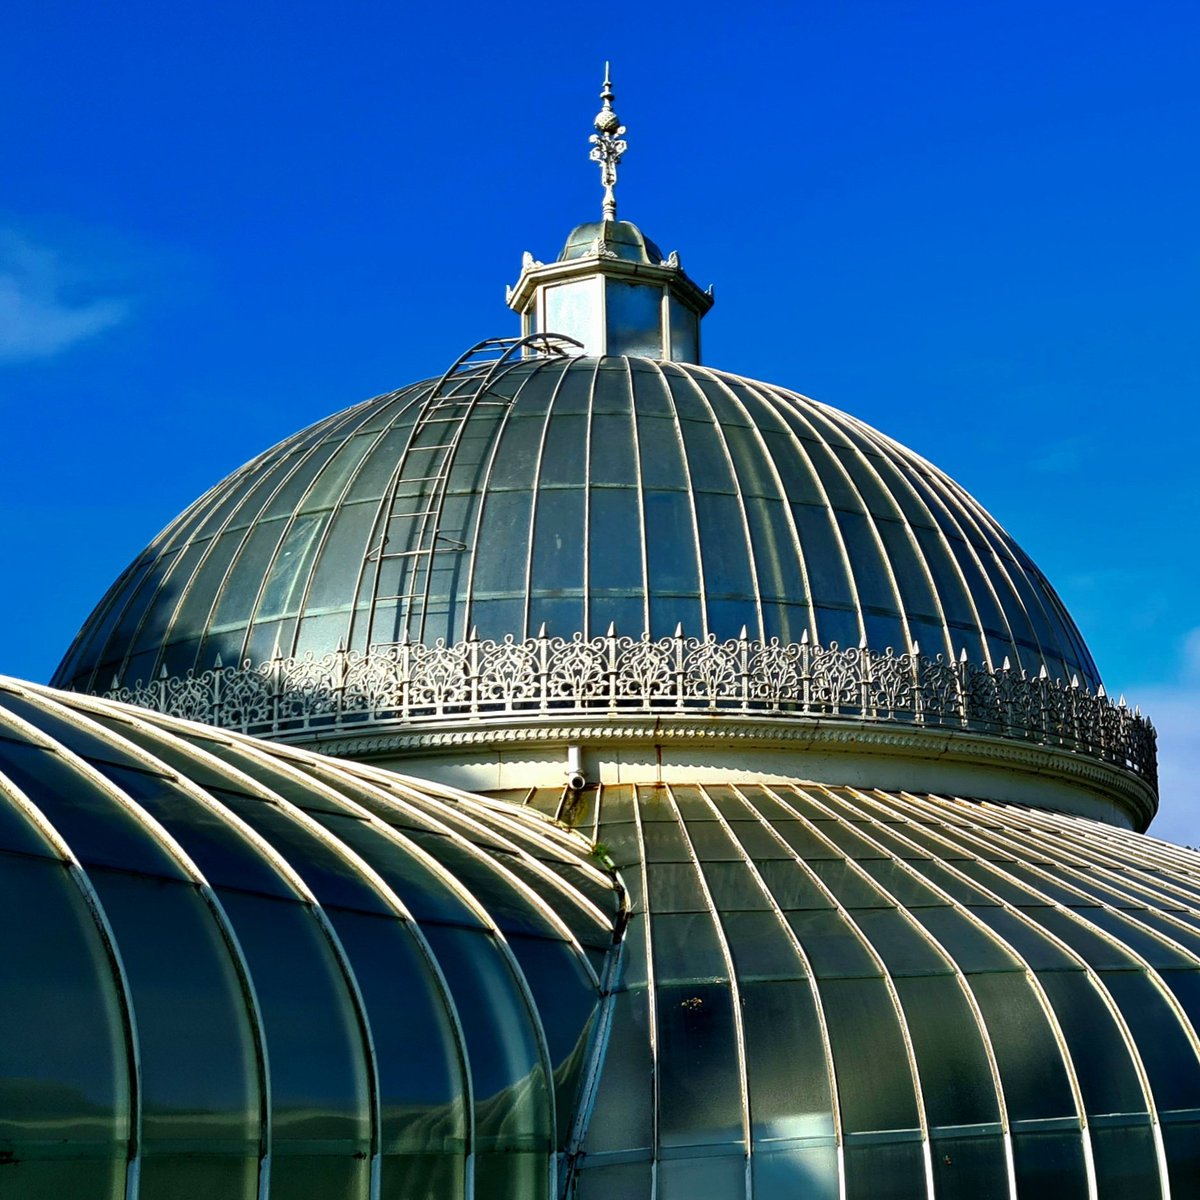 Good Morning, Glasgow. The Kibble Palace in the Botanic Gardens is looking spectacular in this morning's late summer sun. #glasgow#kibblepalace #botanicgardens #glasgowbotanicgardens #architecture #glasgowarchitecture #glasgowbuildings #glasshouse #botanicgarden #goodmorning